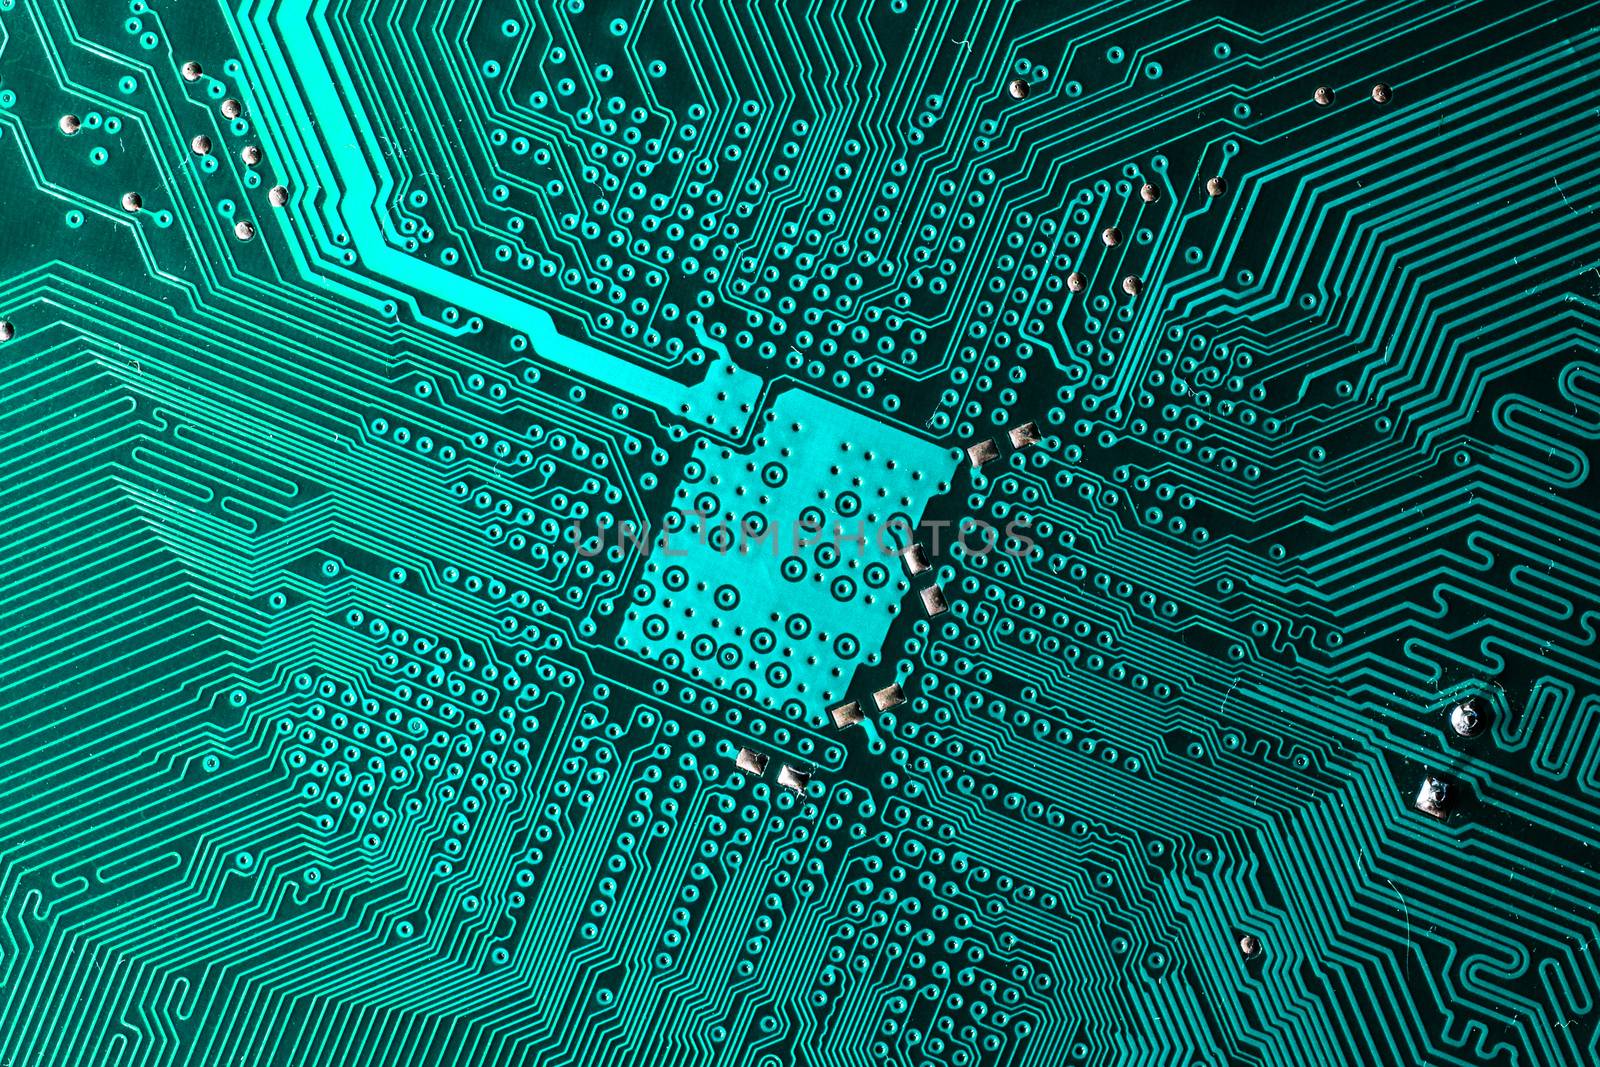 Close up photo of teal printecd circuit board with solder points